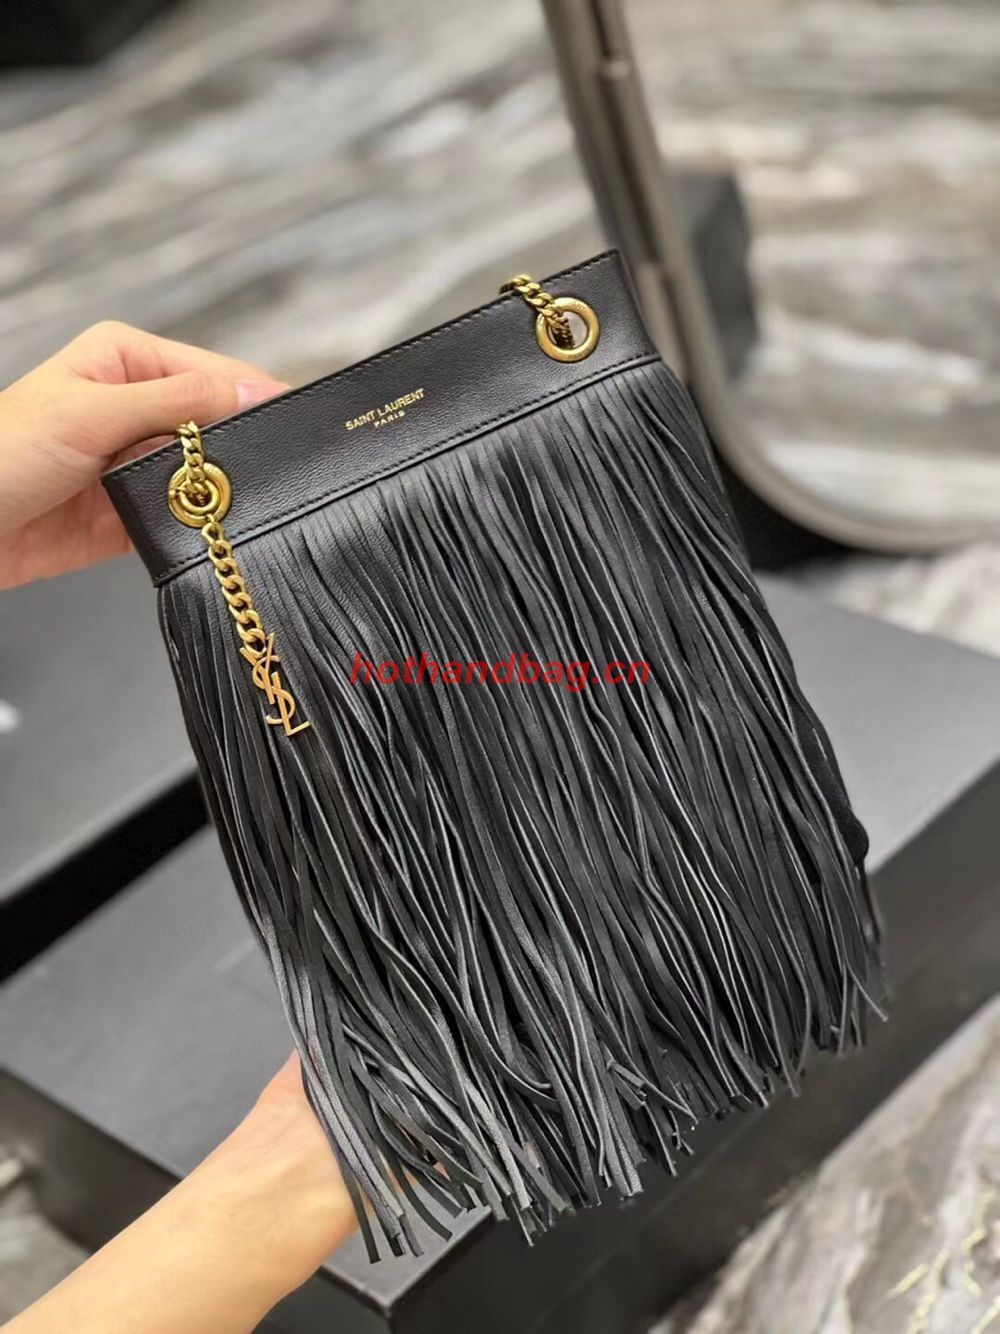 SAINT LAURENT SMALL CHAIN BAG IN SMOOTH LEATHER WITH FRINGES 683378 BLACK